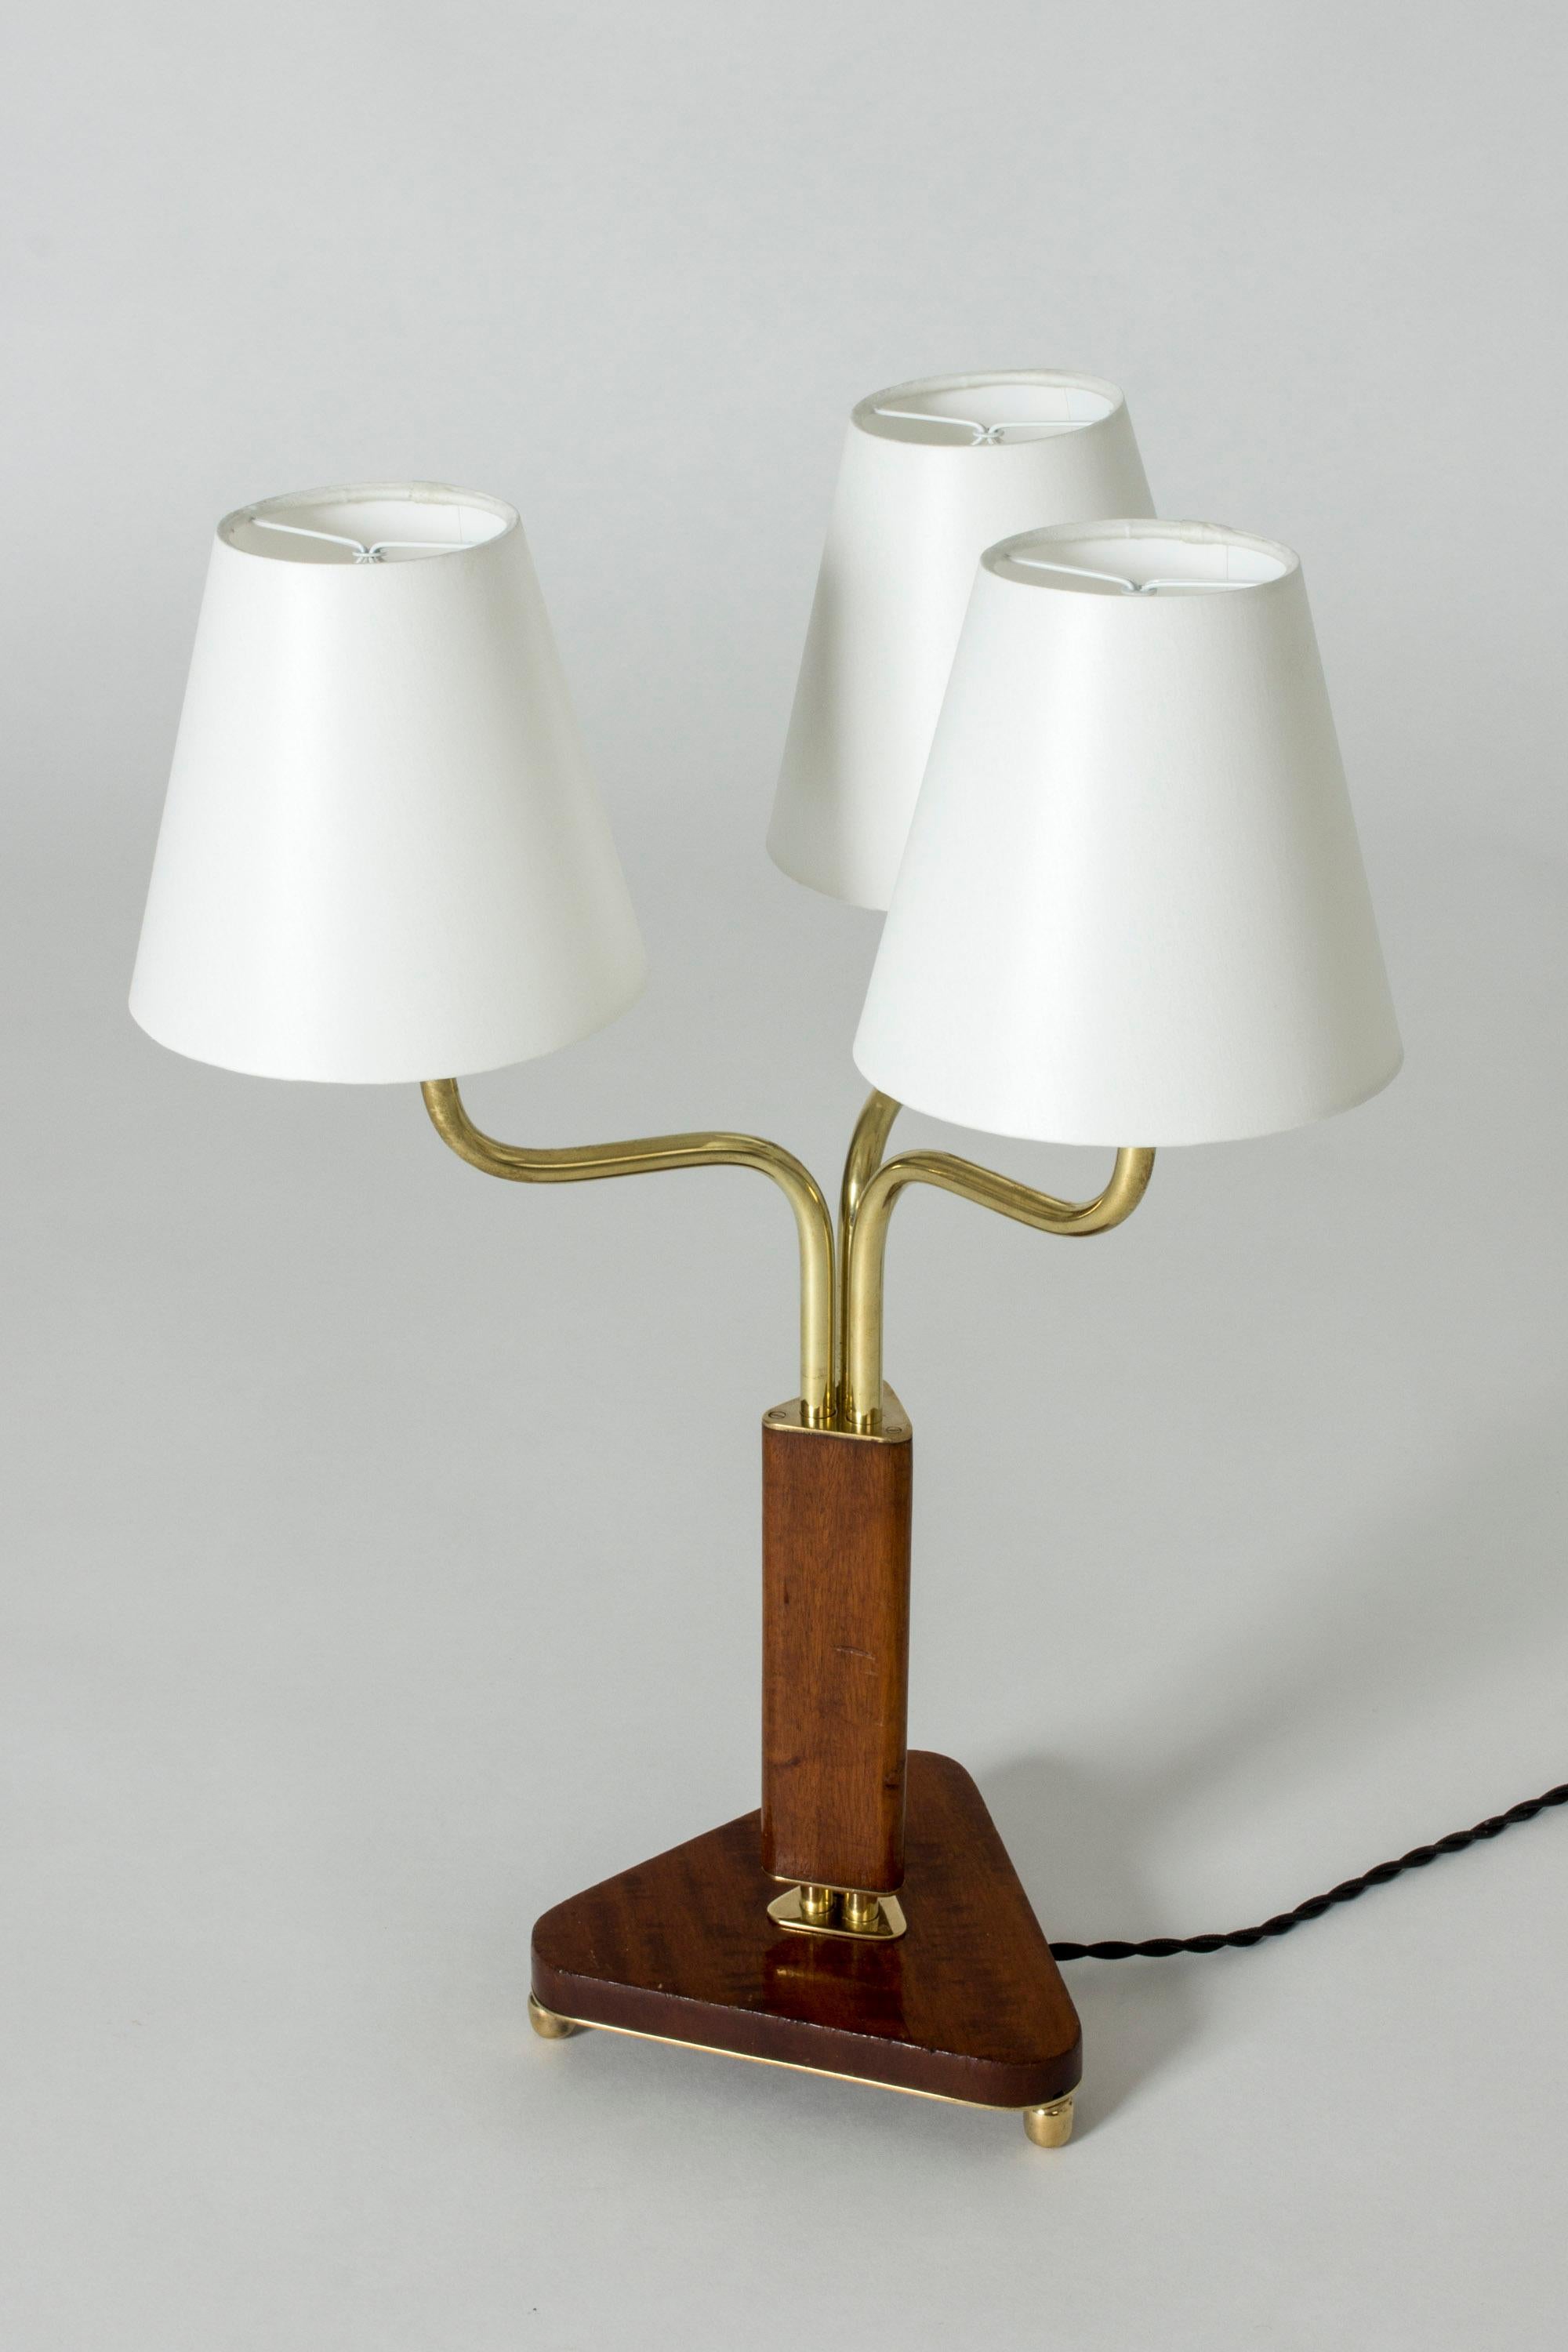 Midcentury Swedish Mahogany Table Lamp In Good Condition For Sale In Stockholm, SE